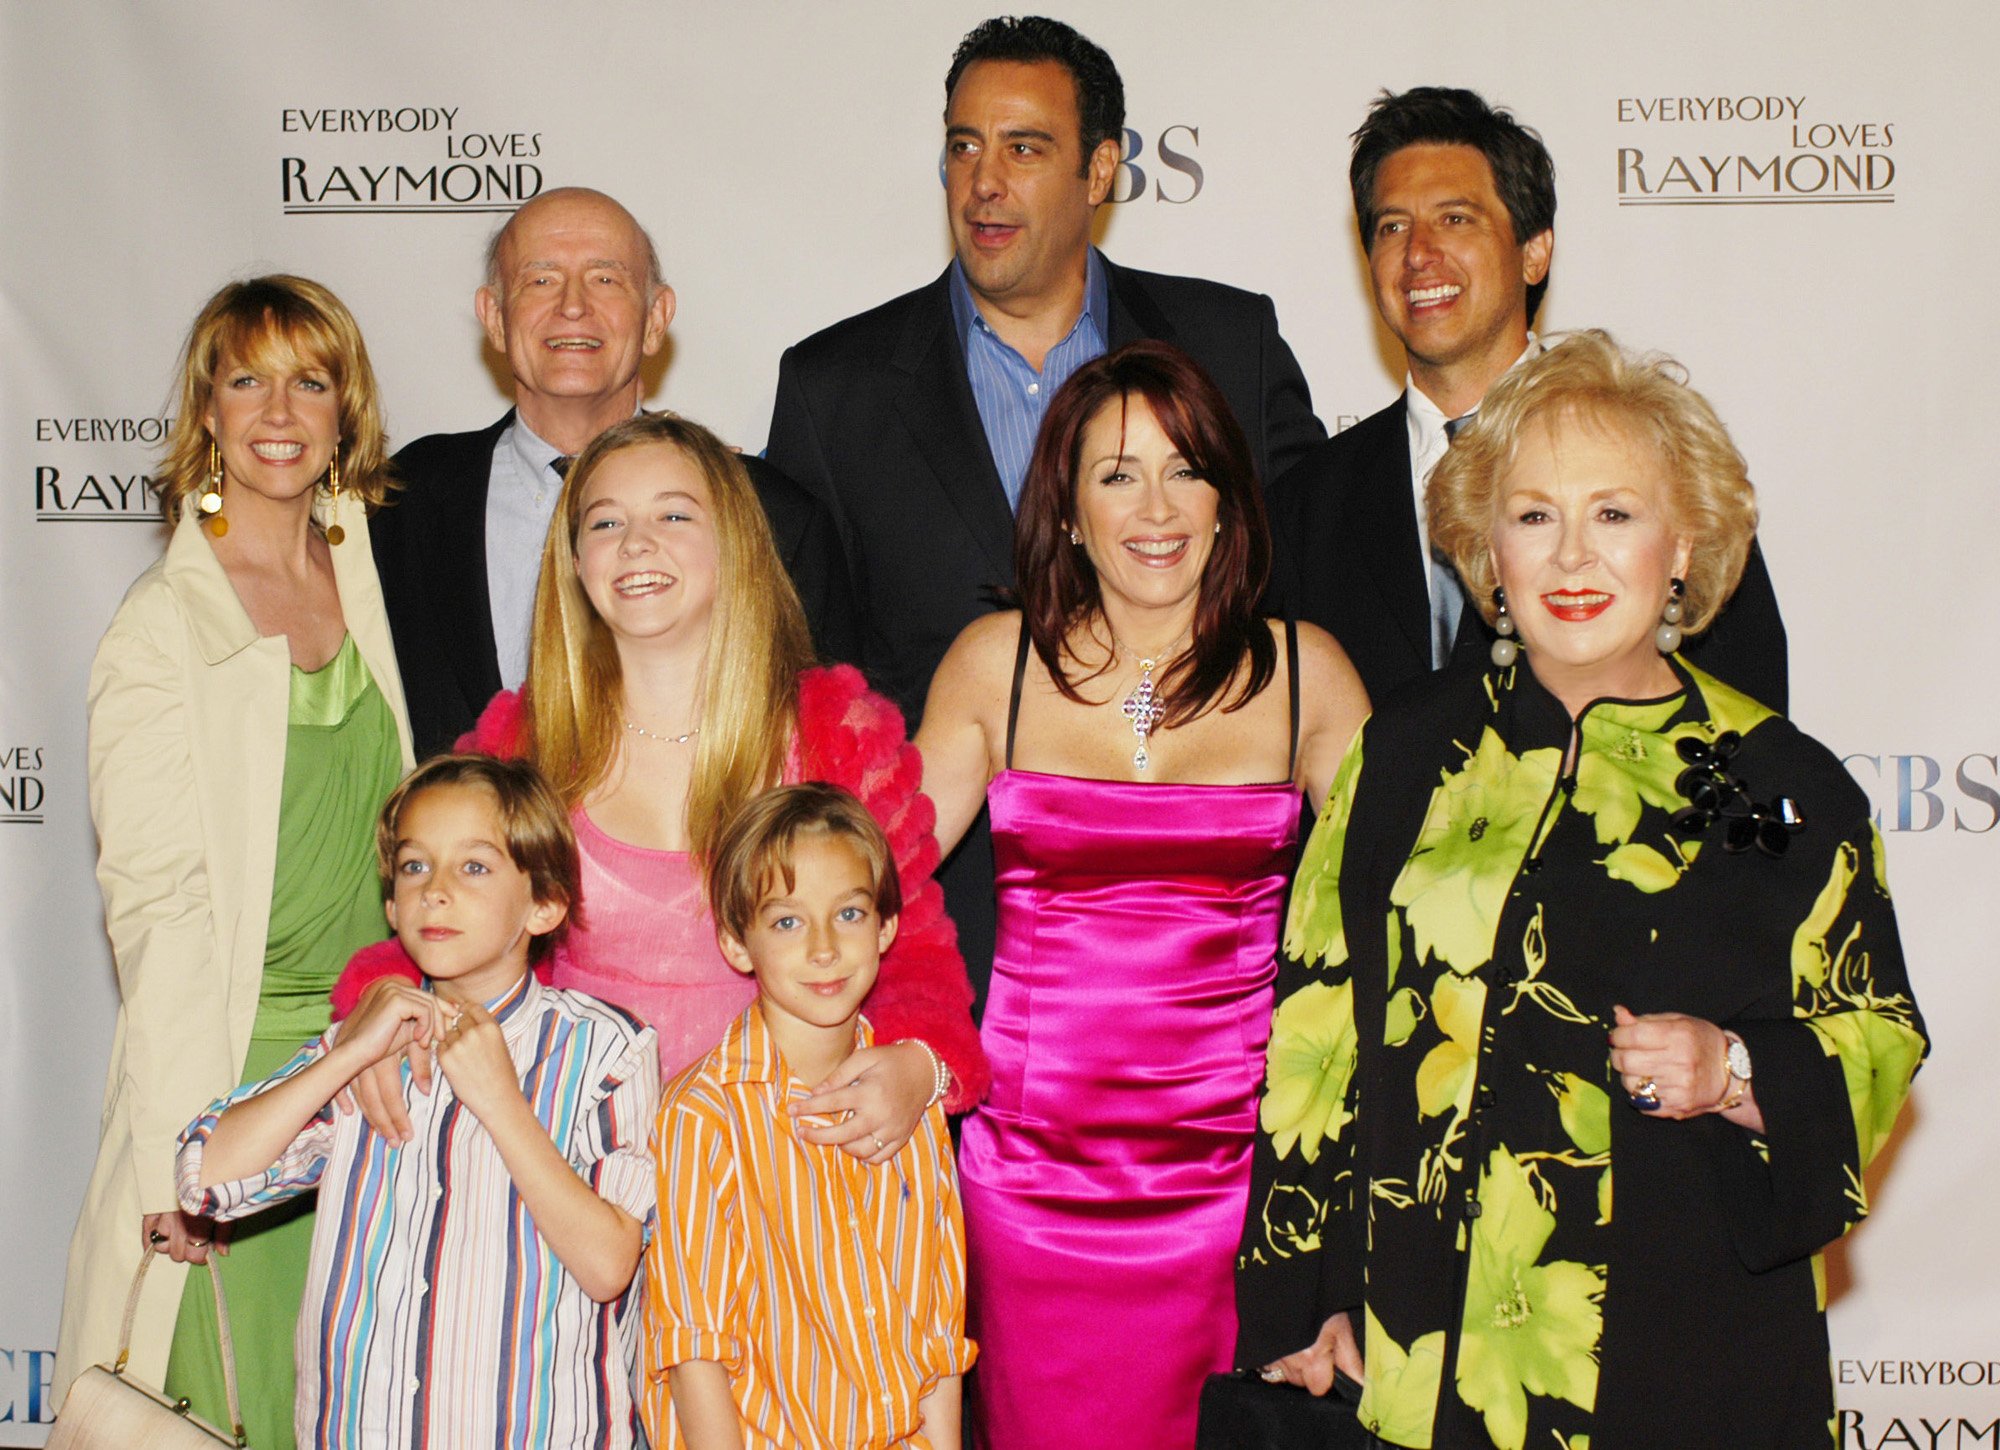 The cast of 'Everybody Loves Raymond' at its series wrap party in 2005.